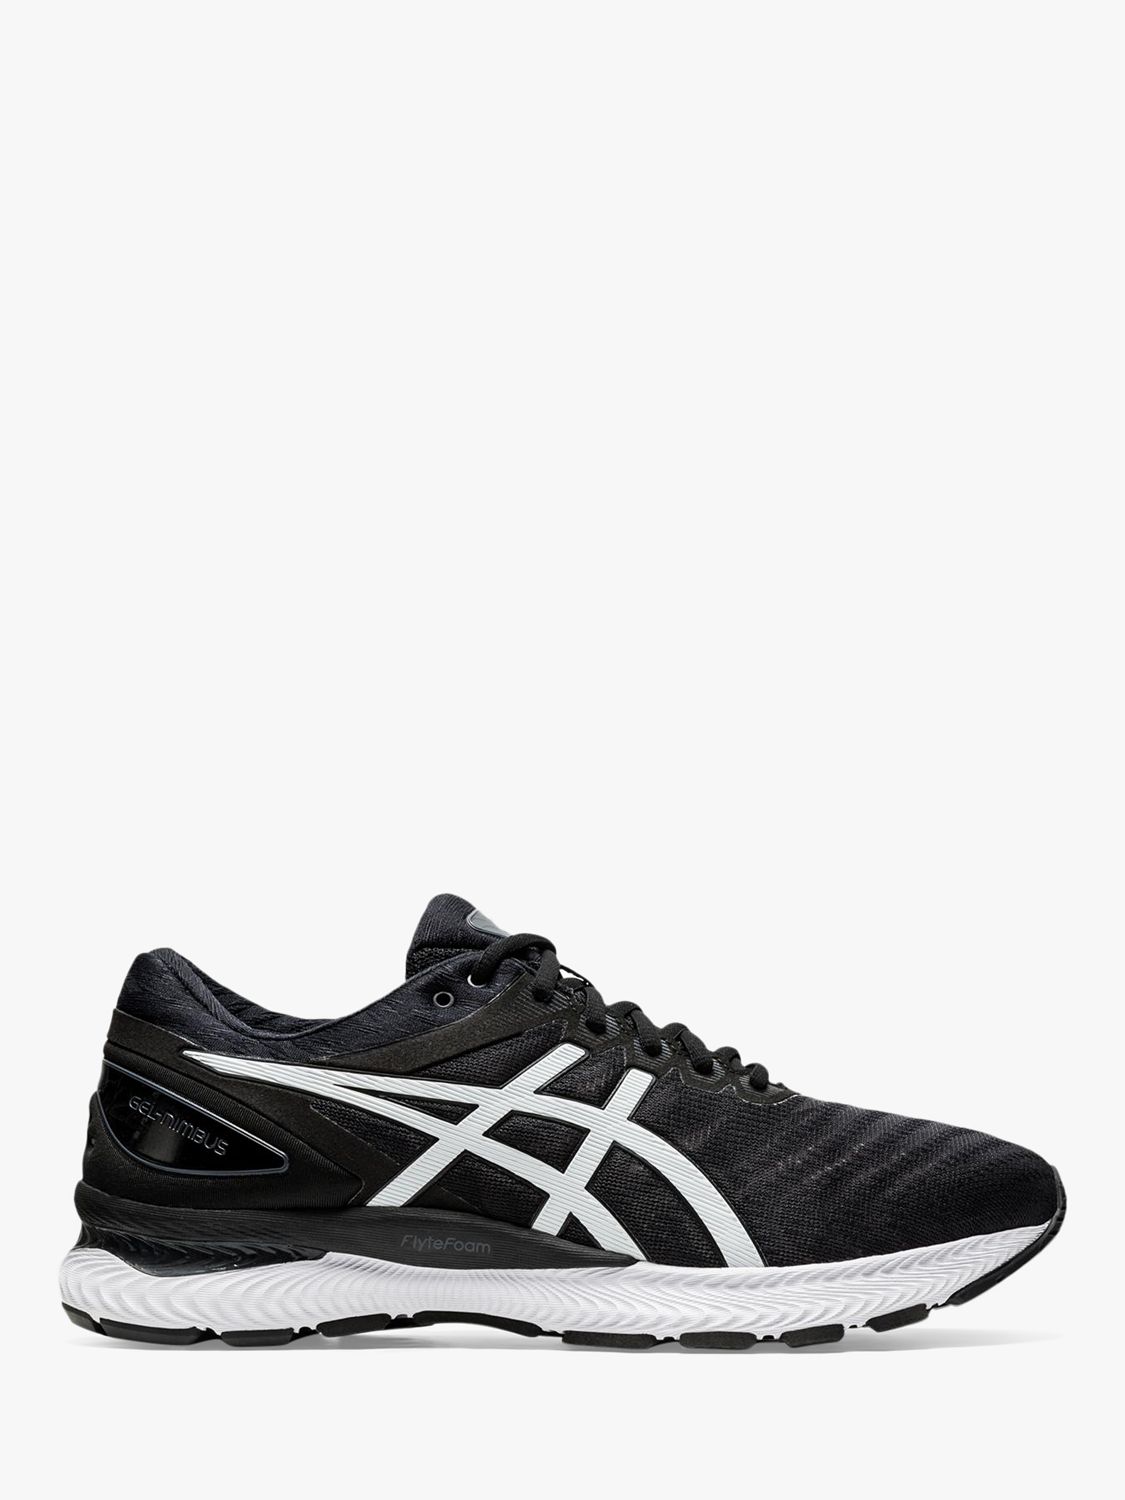 black asic trainers